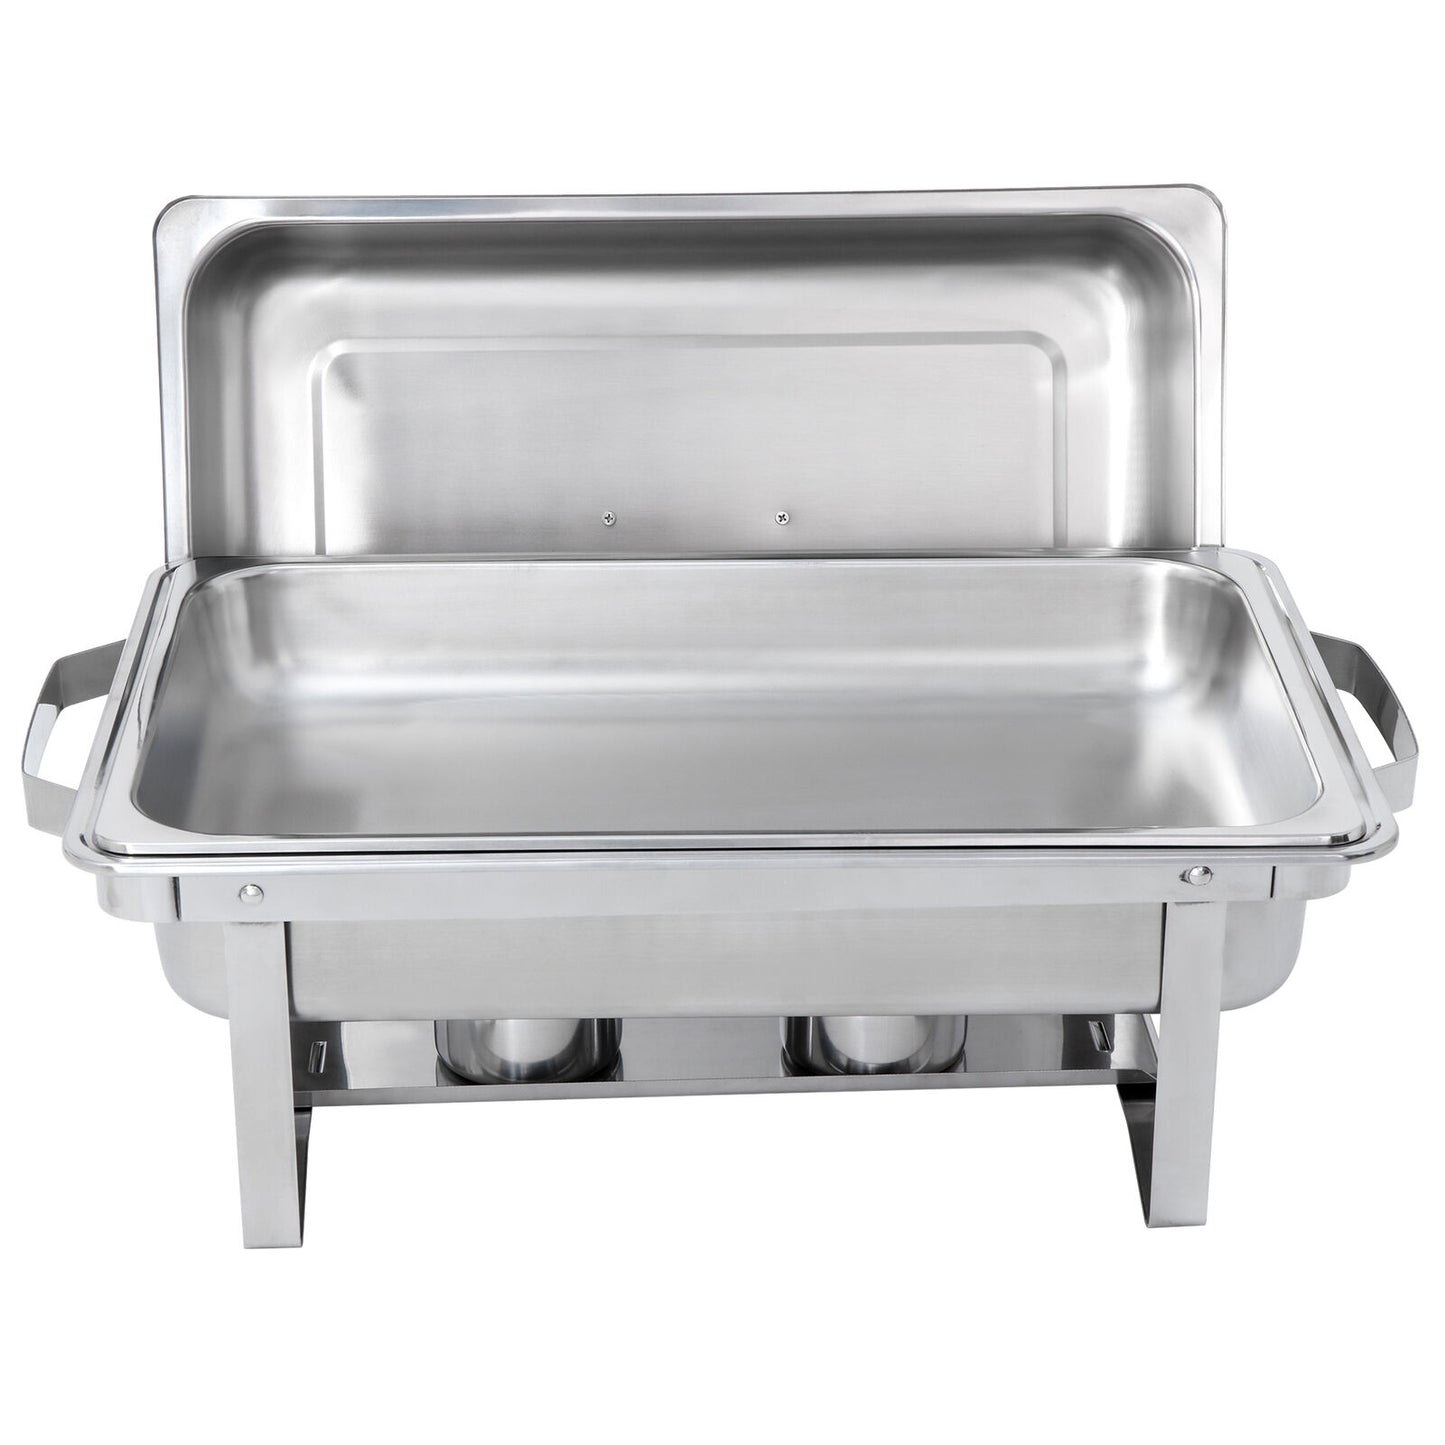 6 Pack 8QT Chafing Dish Stainless Steel Chafer Complete Set with Warmer